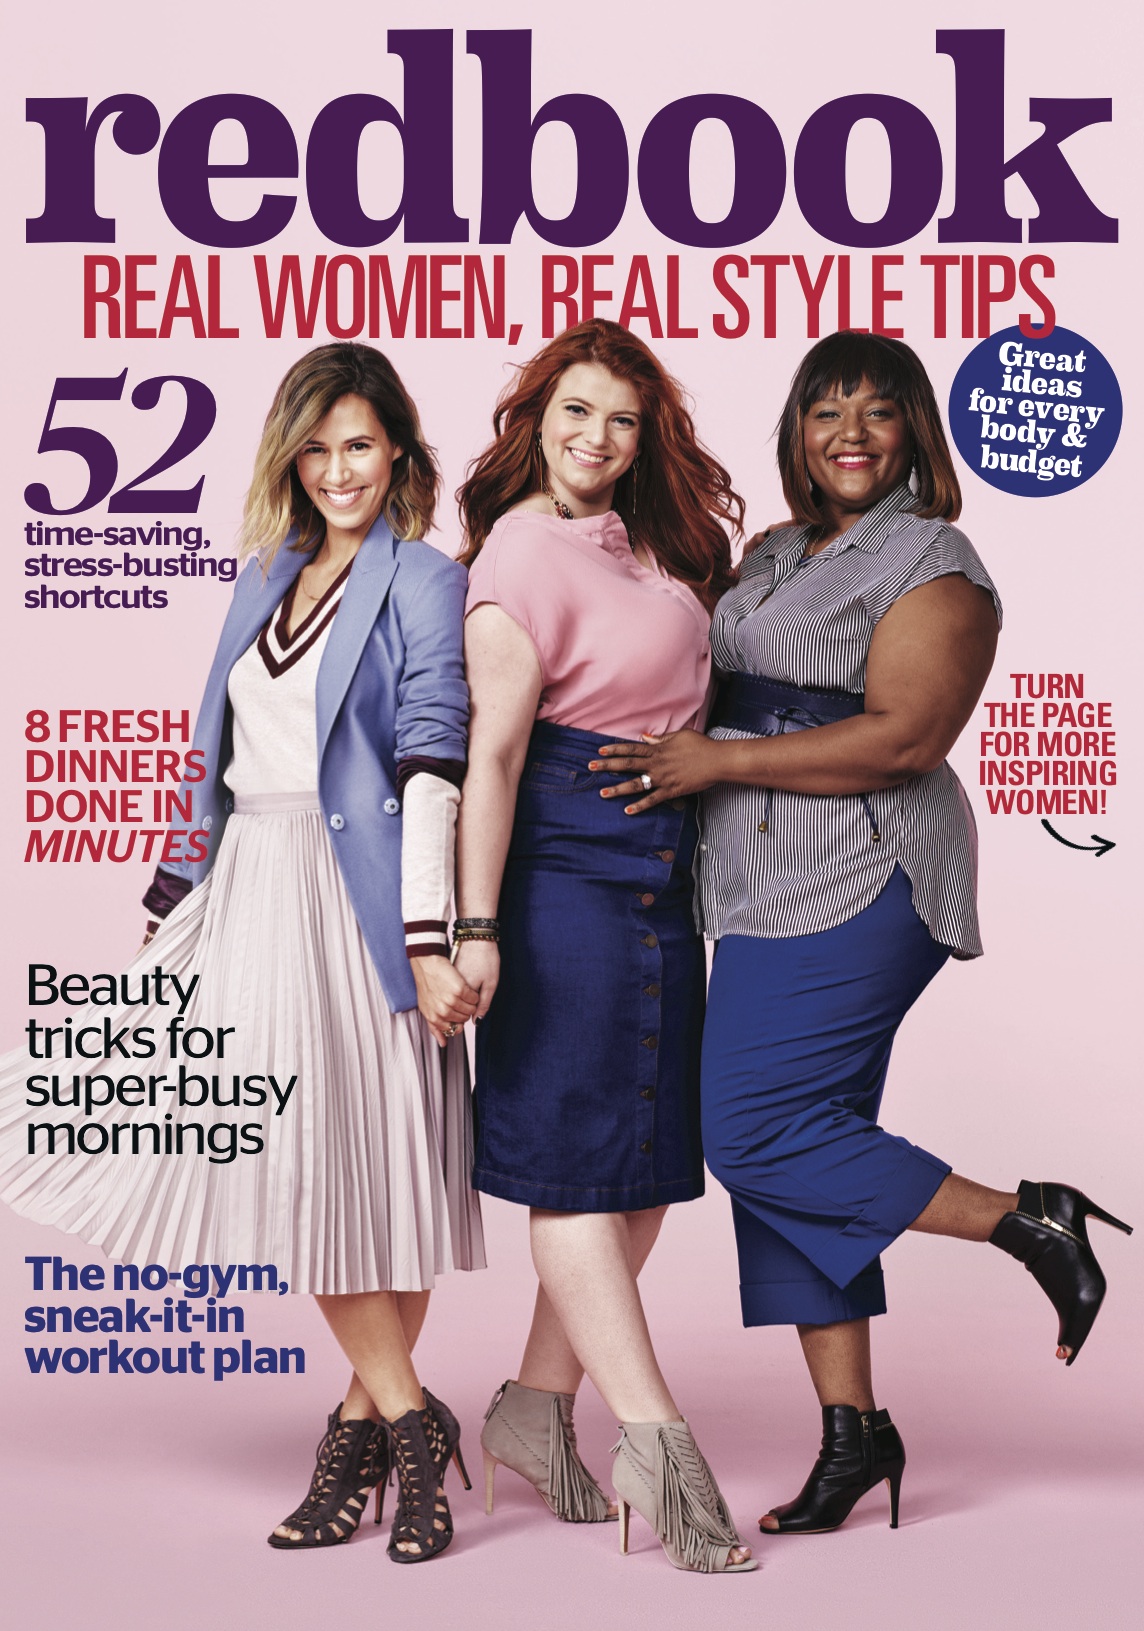 Redbook-"Real Women, Real Style Tips," September